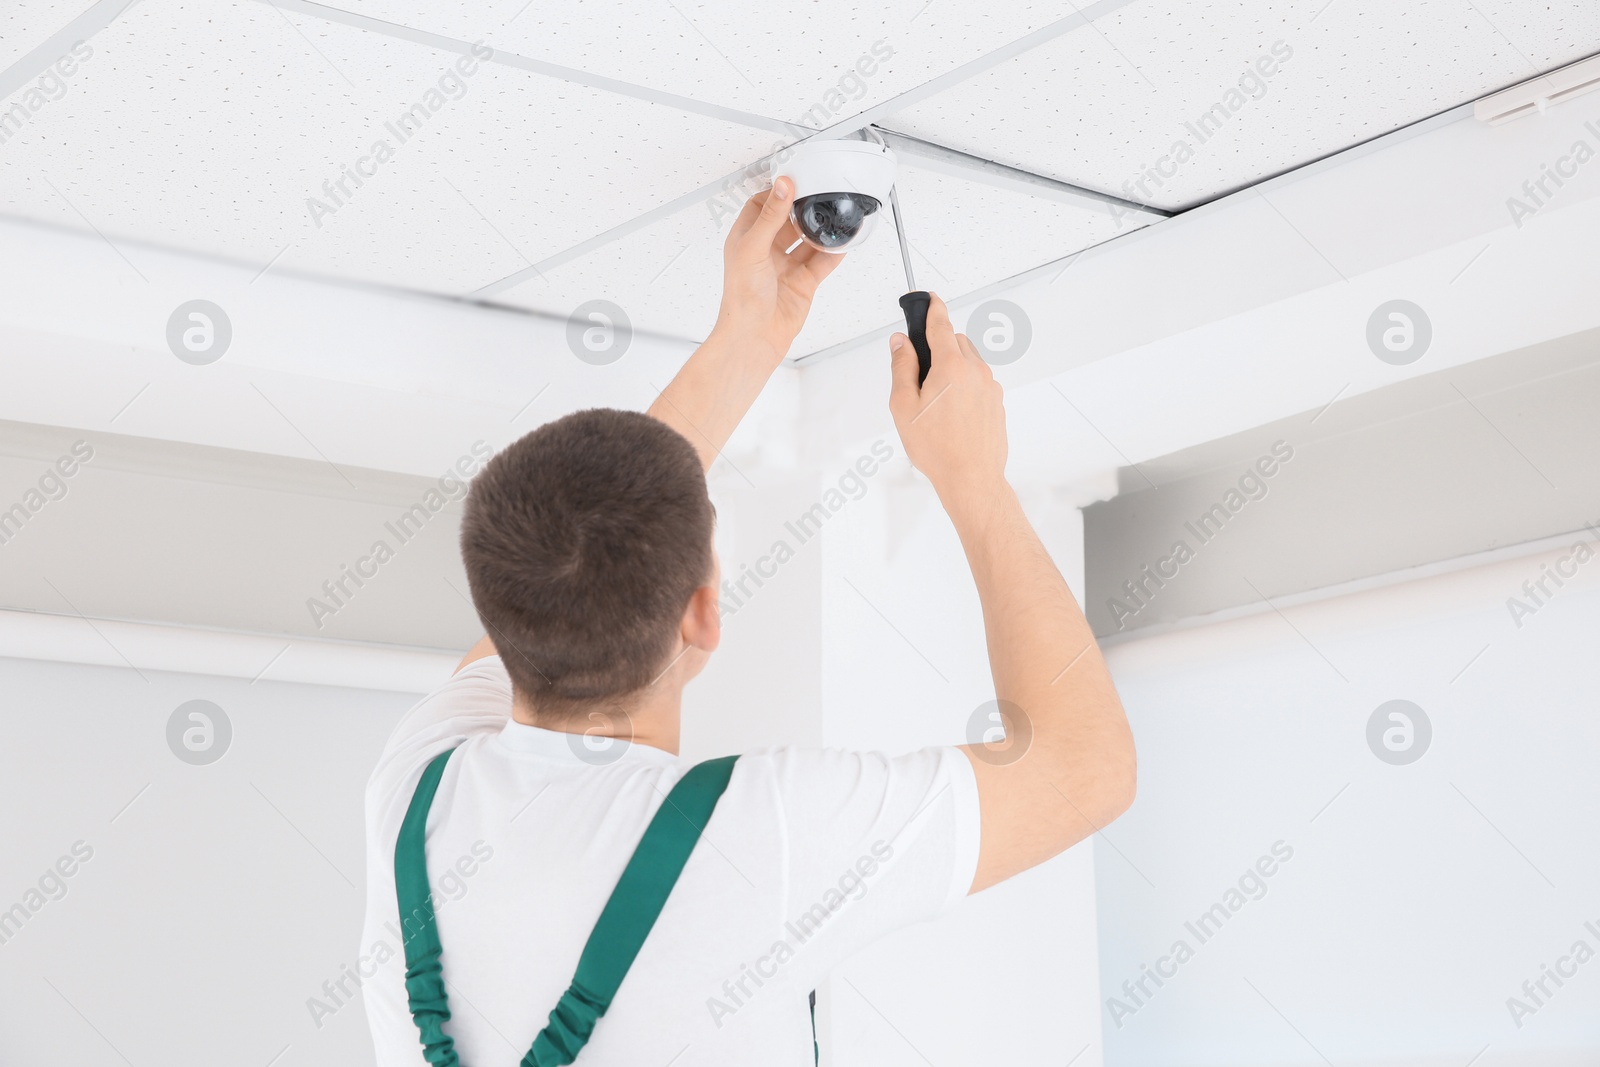 Photo of Technician with screwdriver installing CCTV camera on ceiling indoors, back view